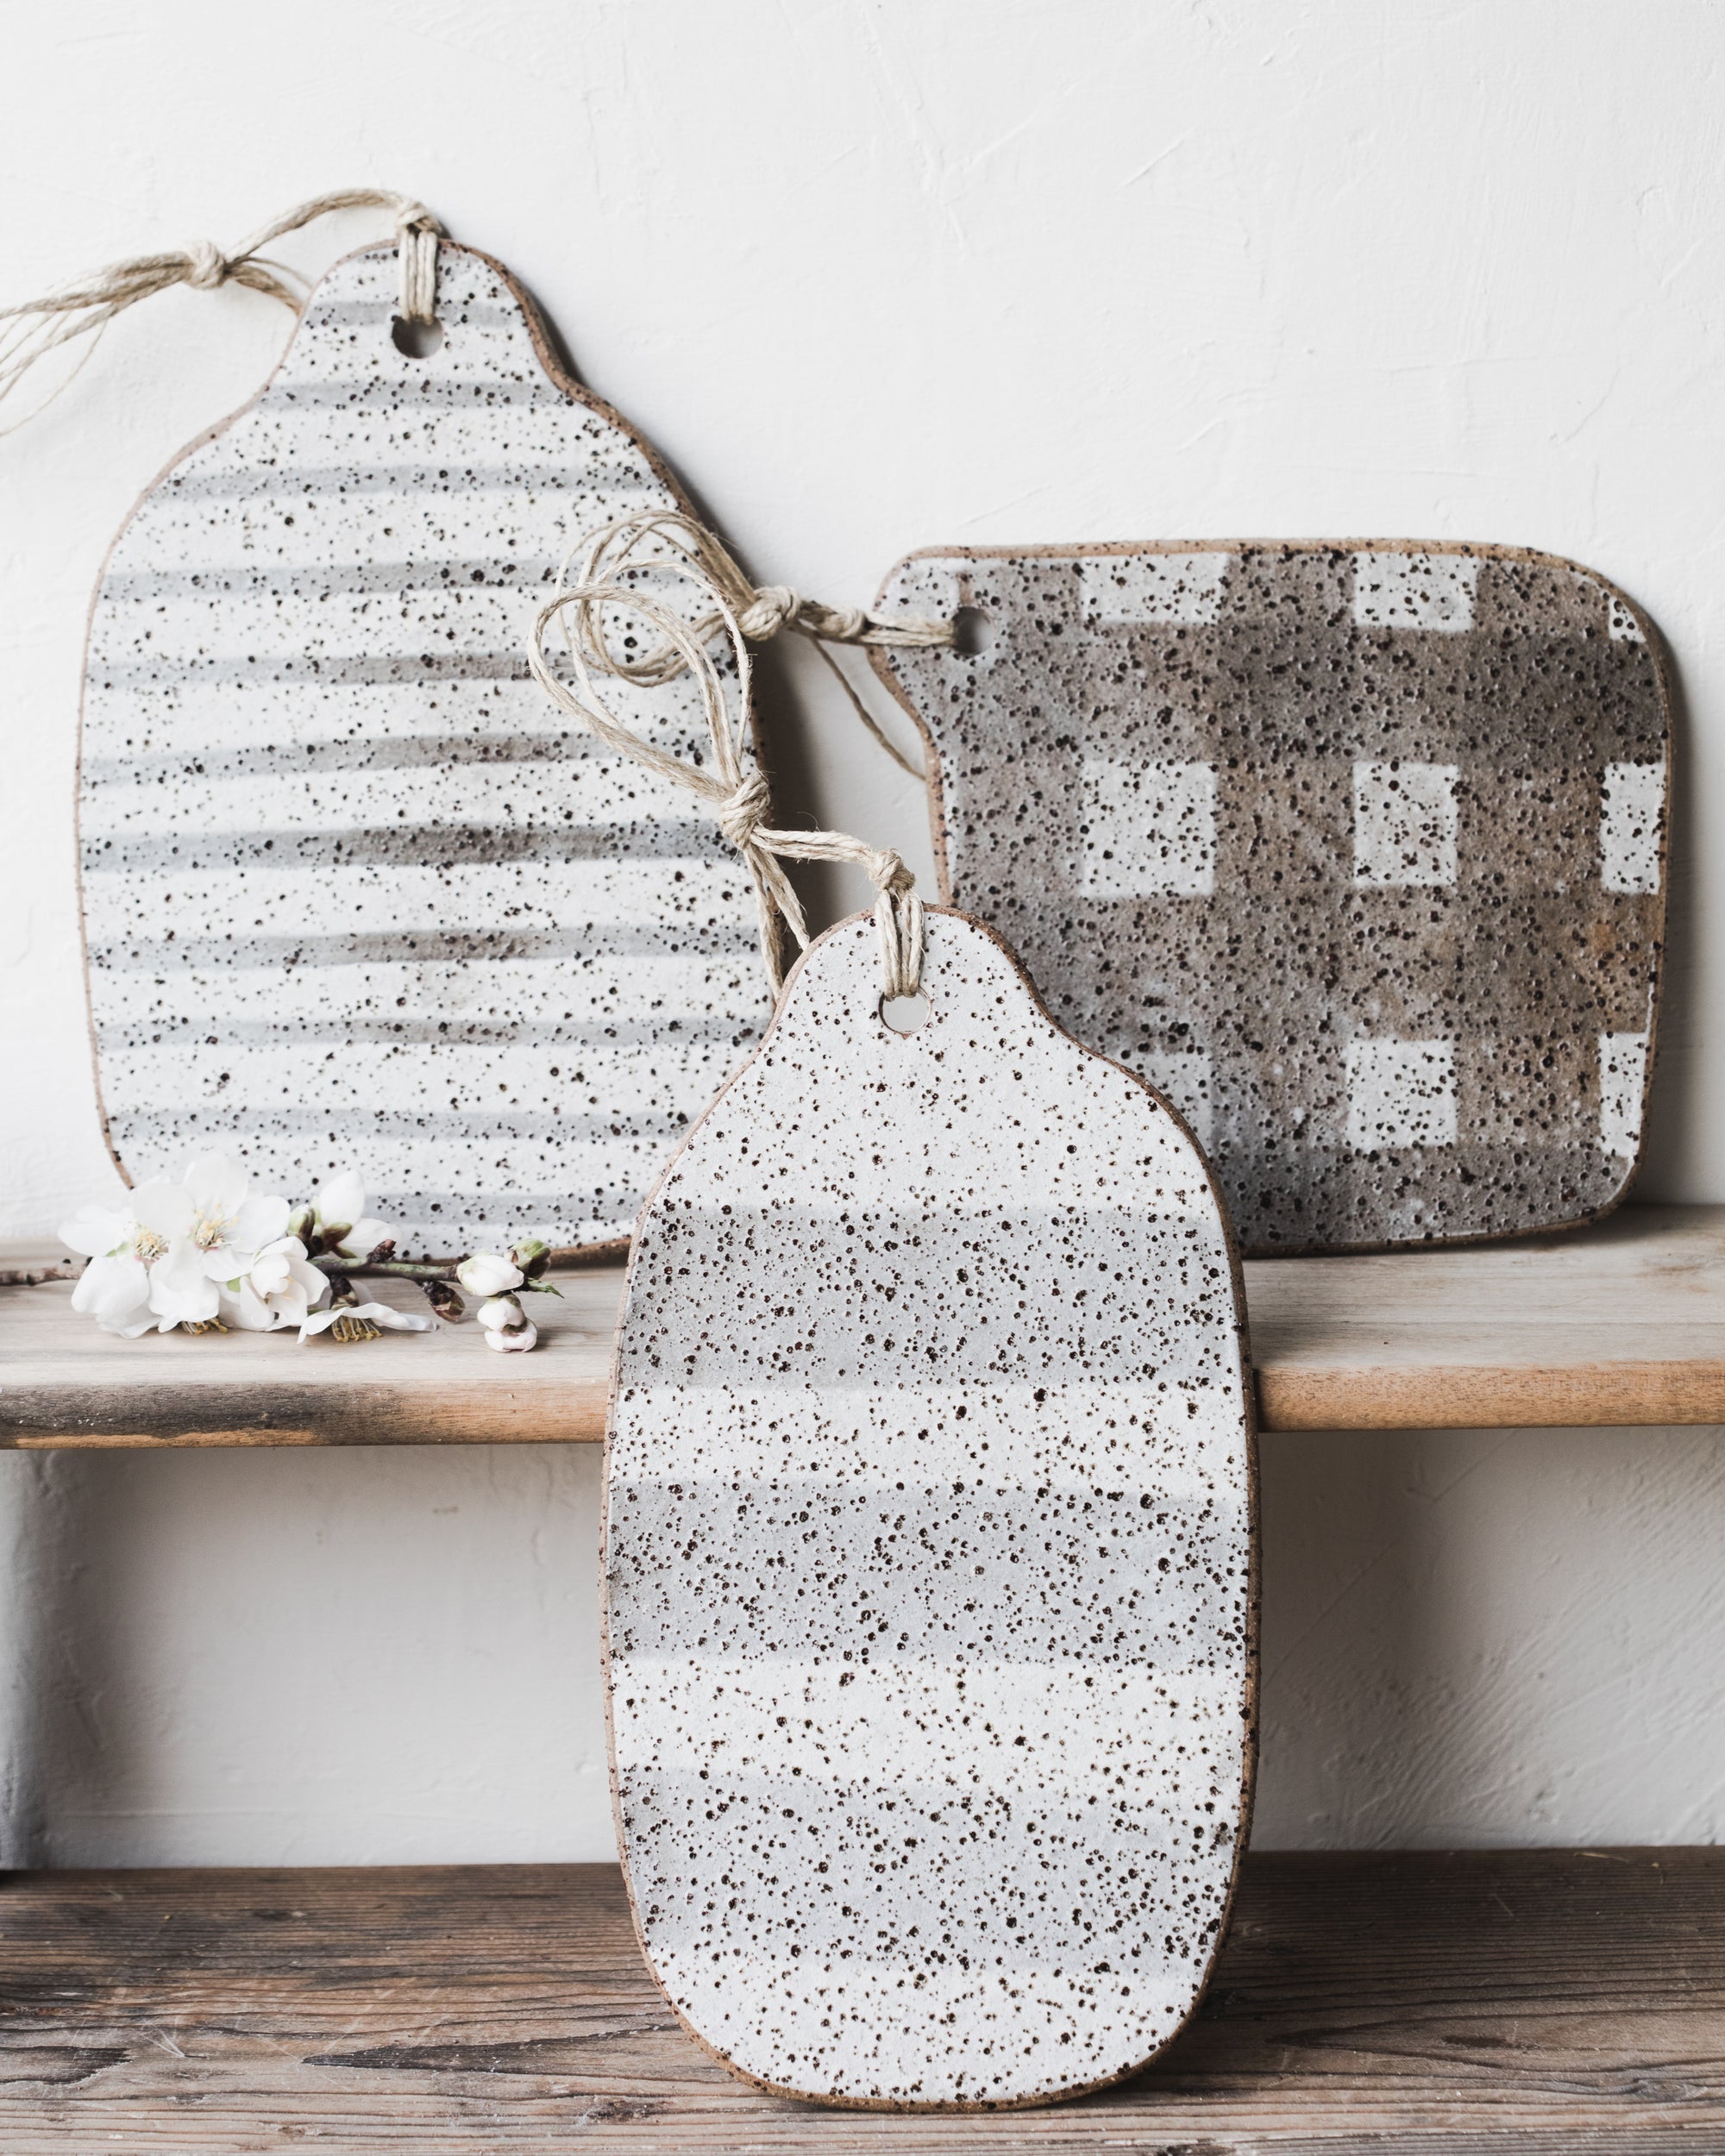 Handmade rustic speckled organic shaped cheeseboards with lines/grid patterns with hemp cord attached by clay beehive 